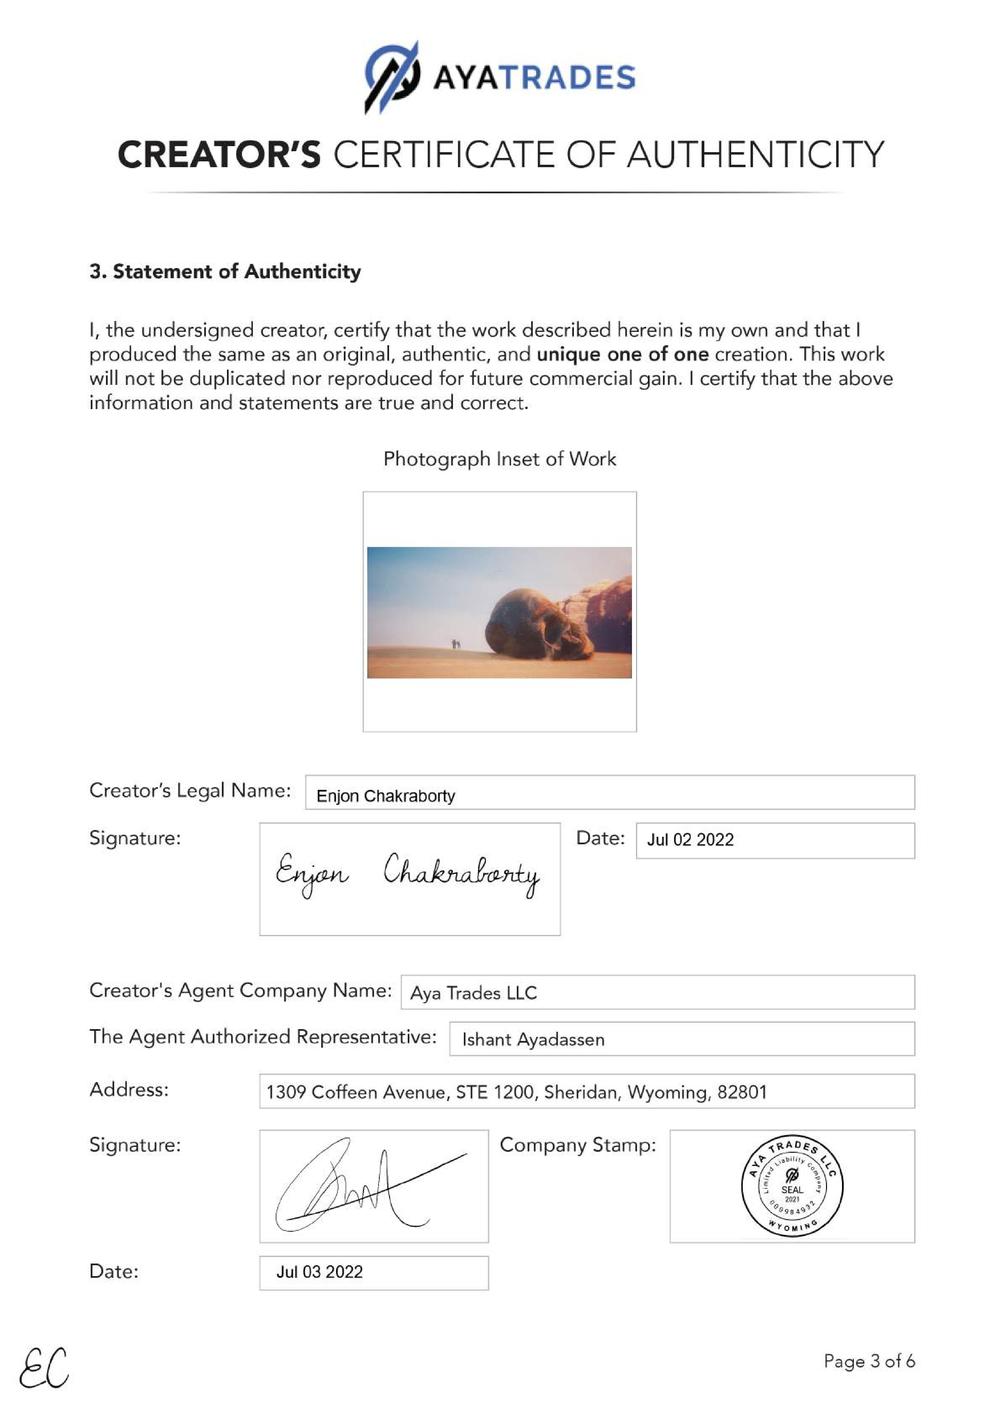 Certificate of Authenticity and Consignment - Anomalous Encounter